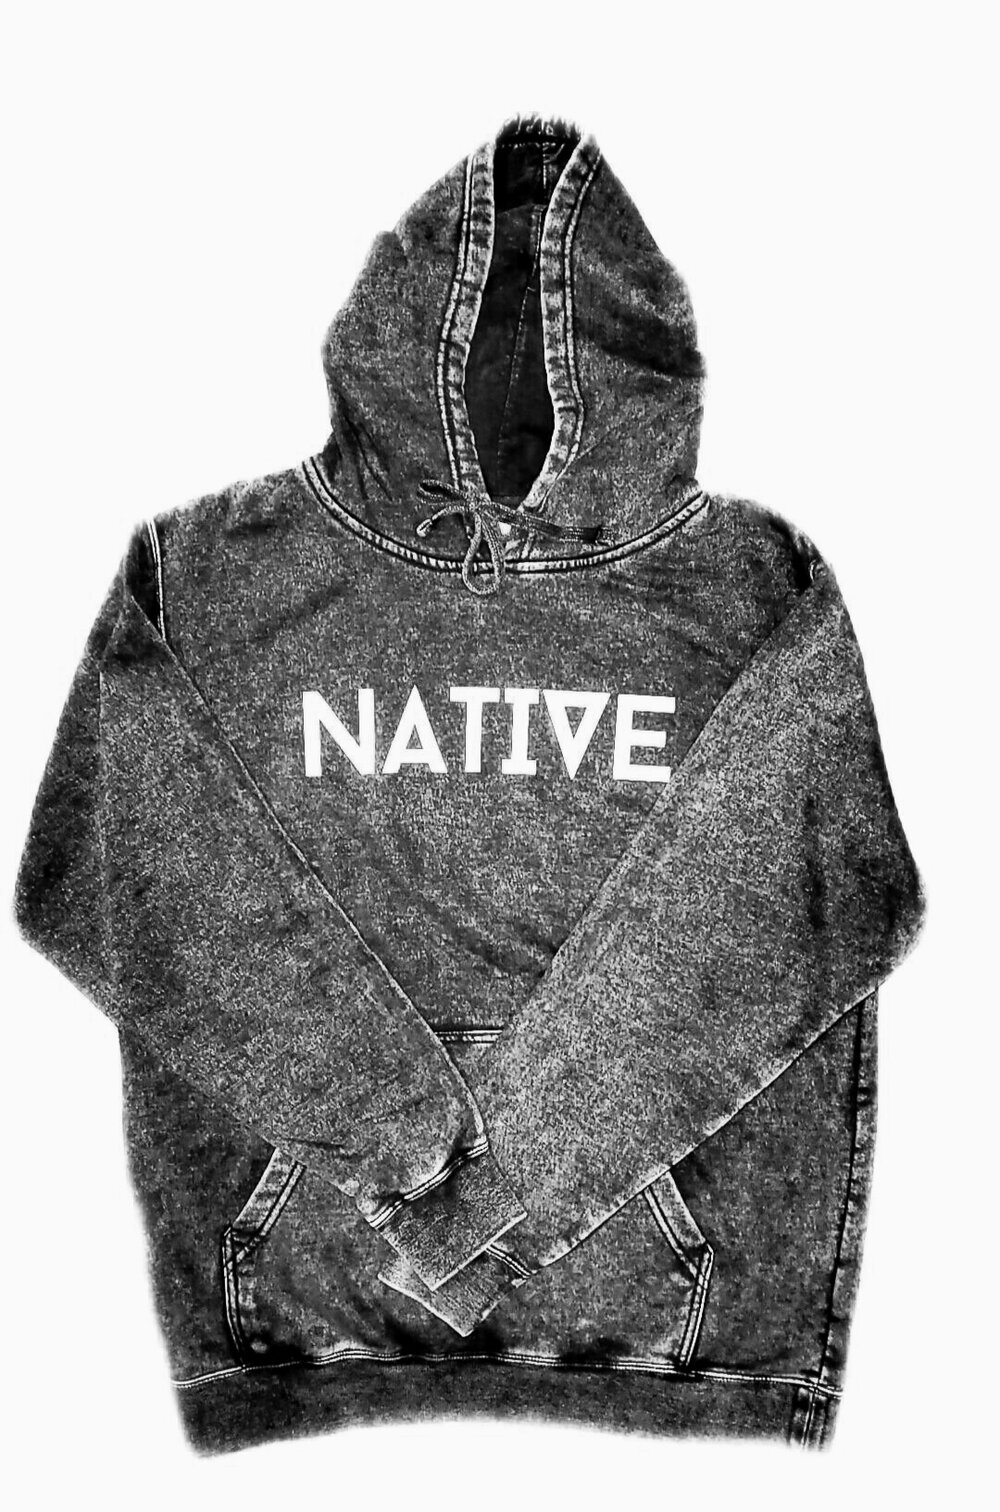 NATIVE Lightweight Windbreaker Jacket - Black with Camo — Native in  Nashville ™ by Amber Ford